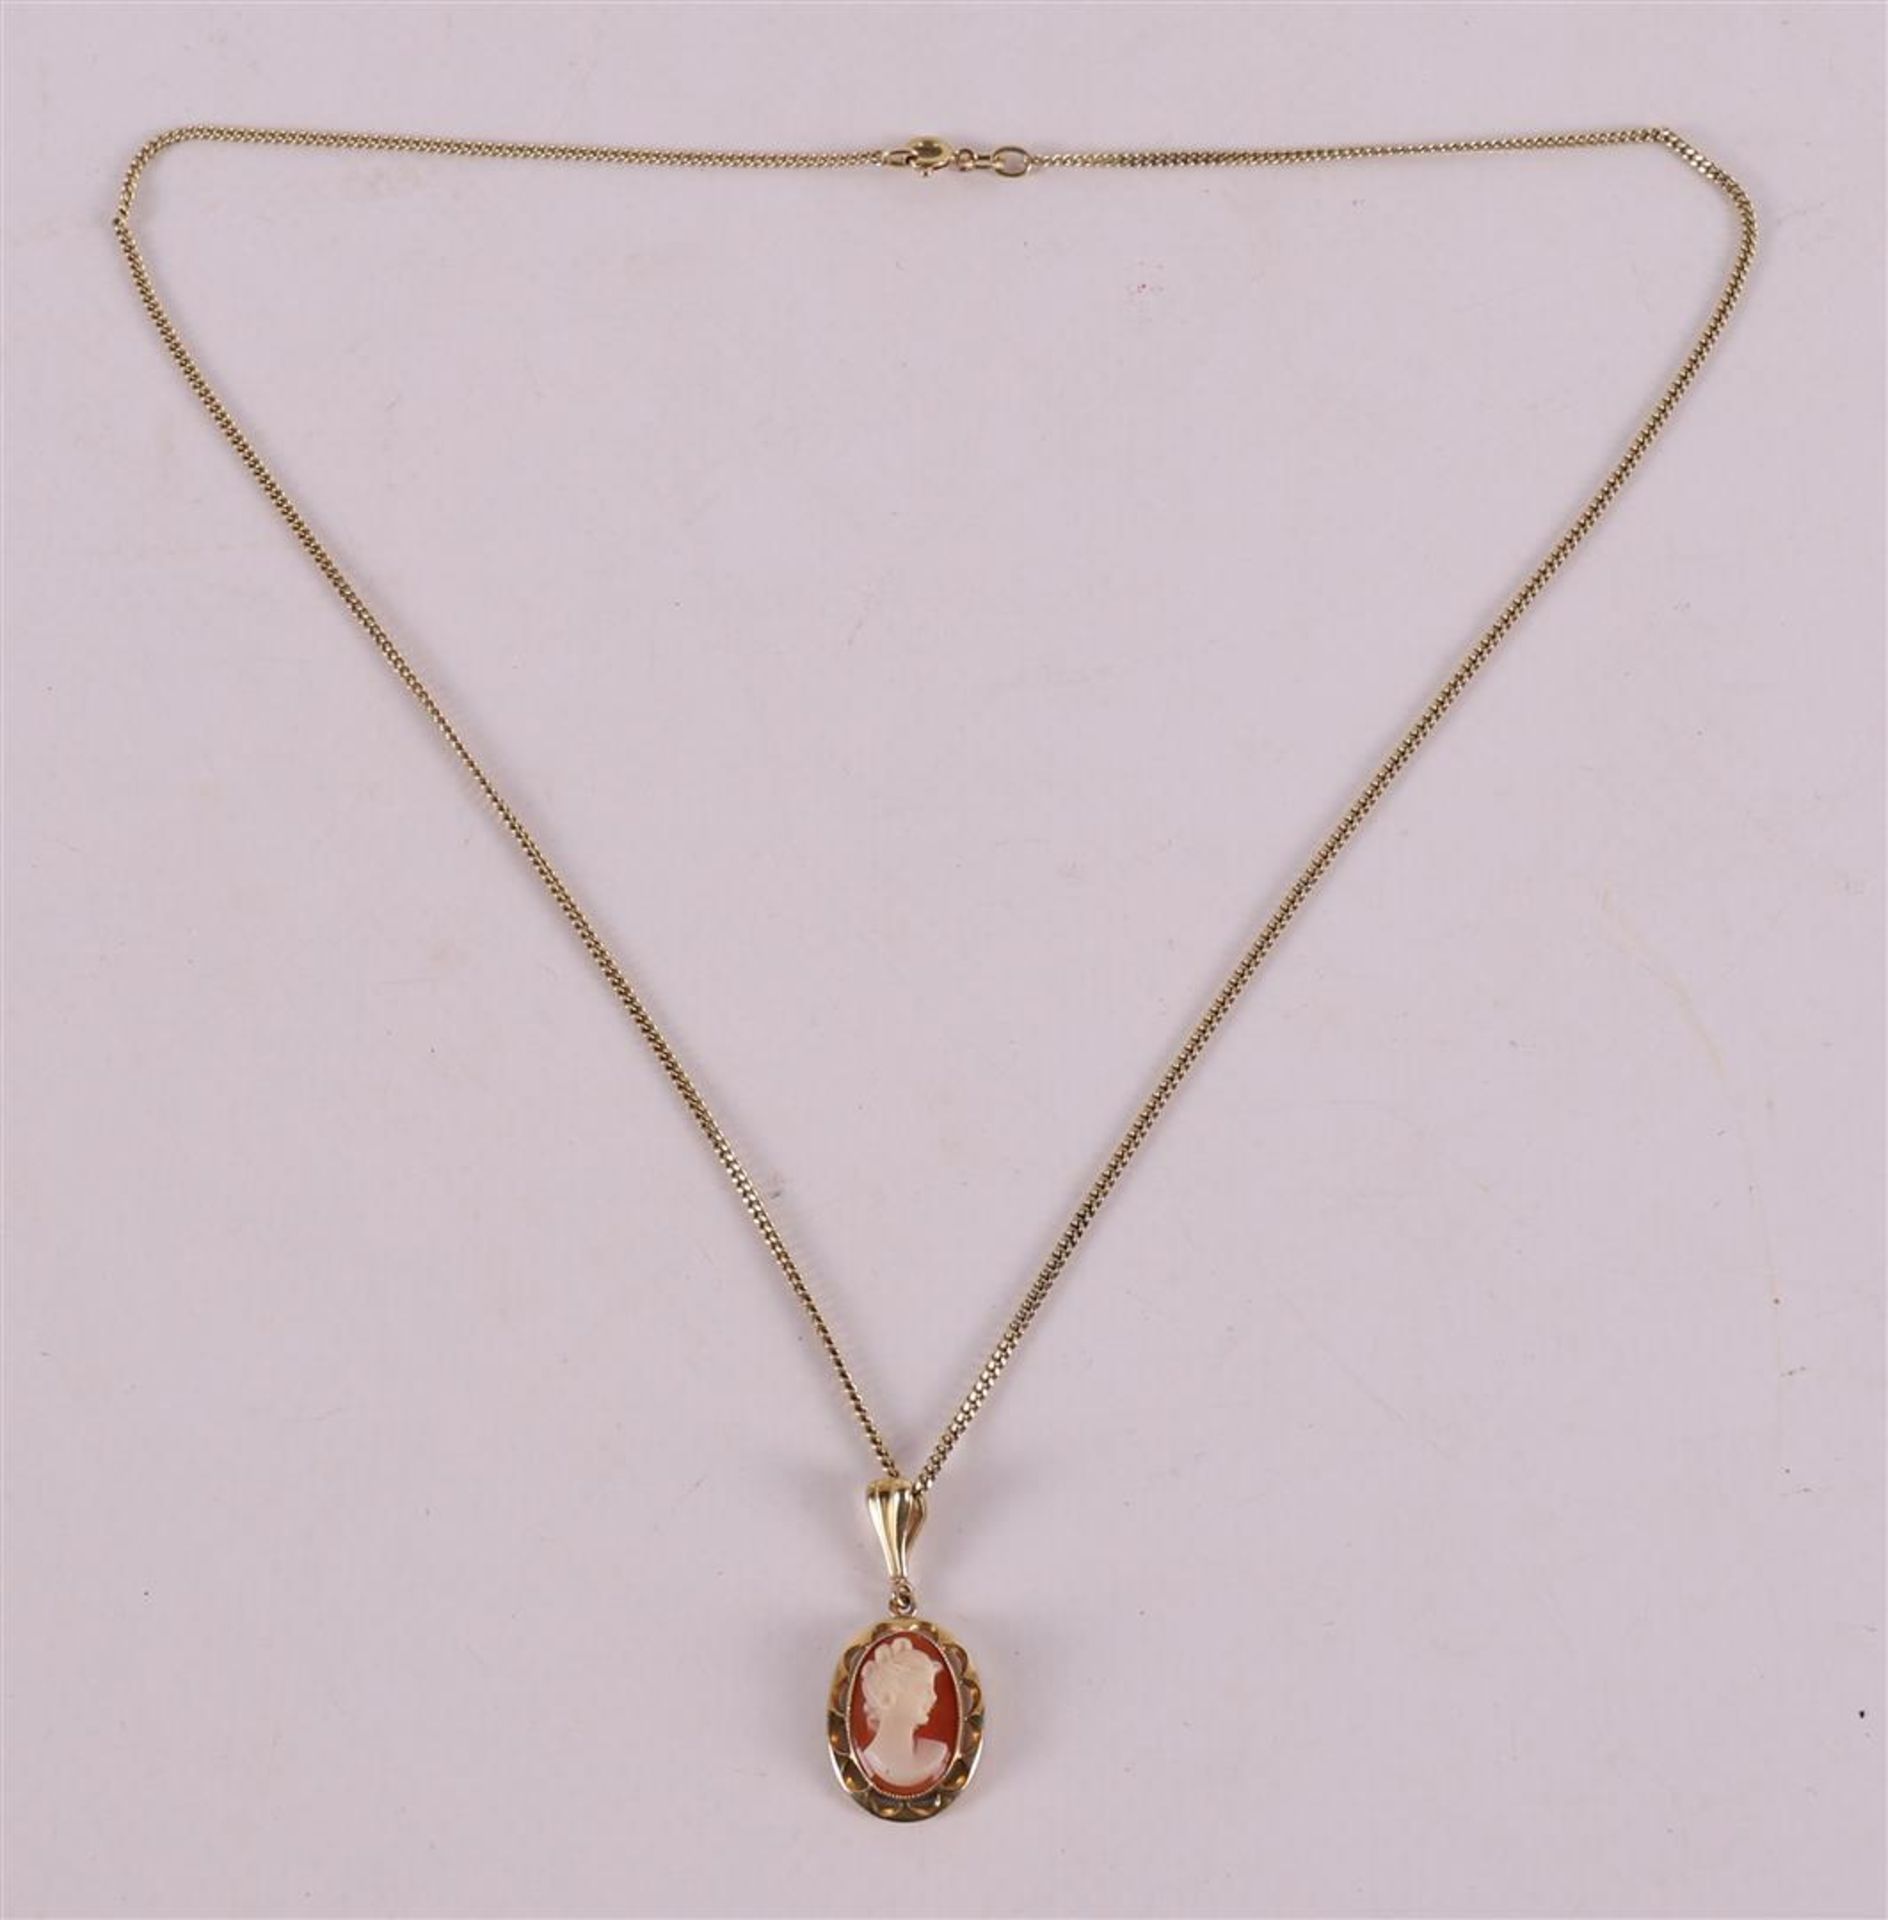 A 14 kt gold necklace with cameo pendant, circa 1900.